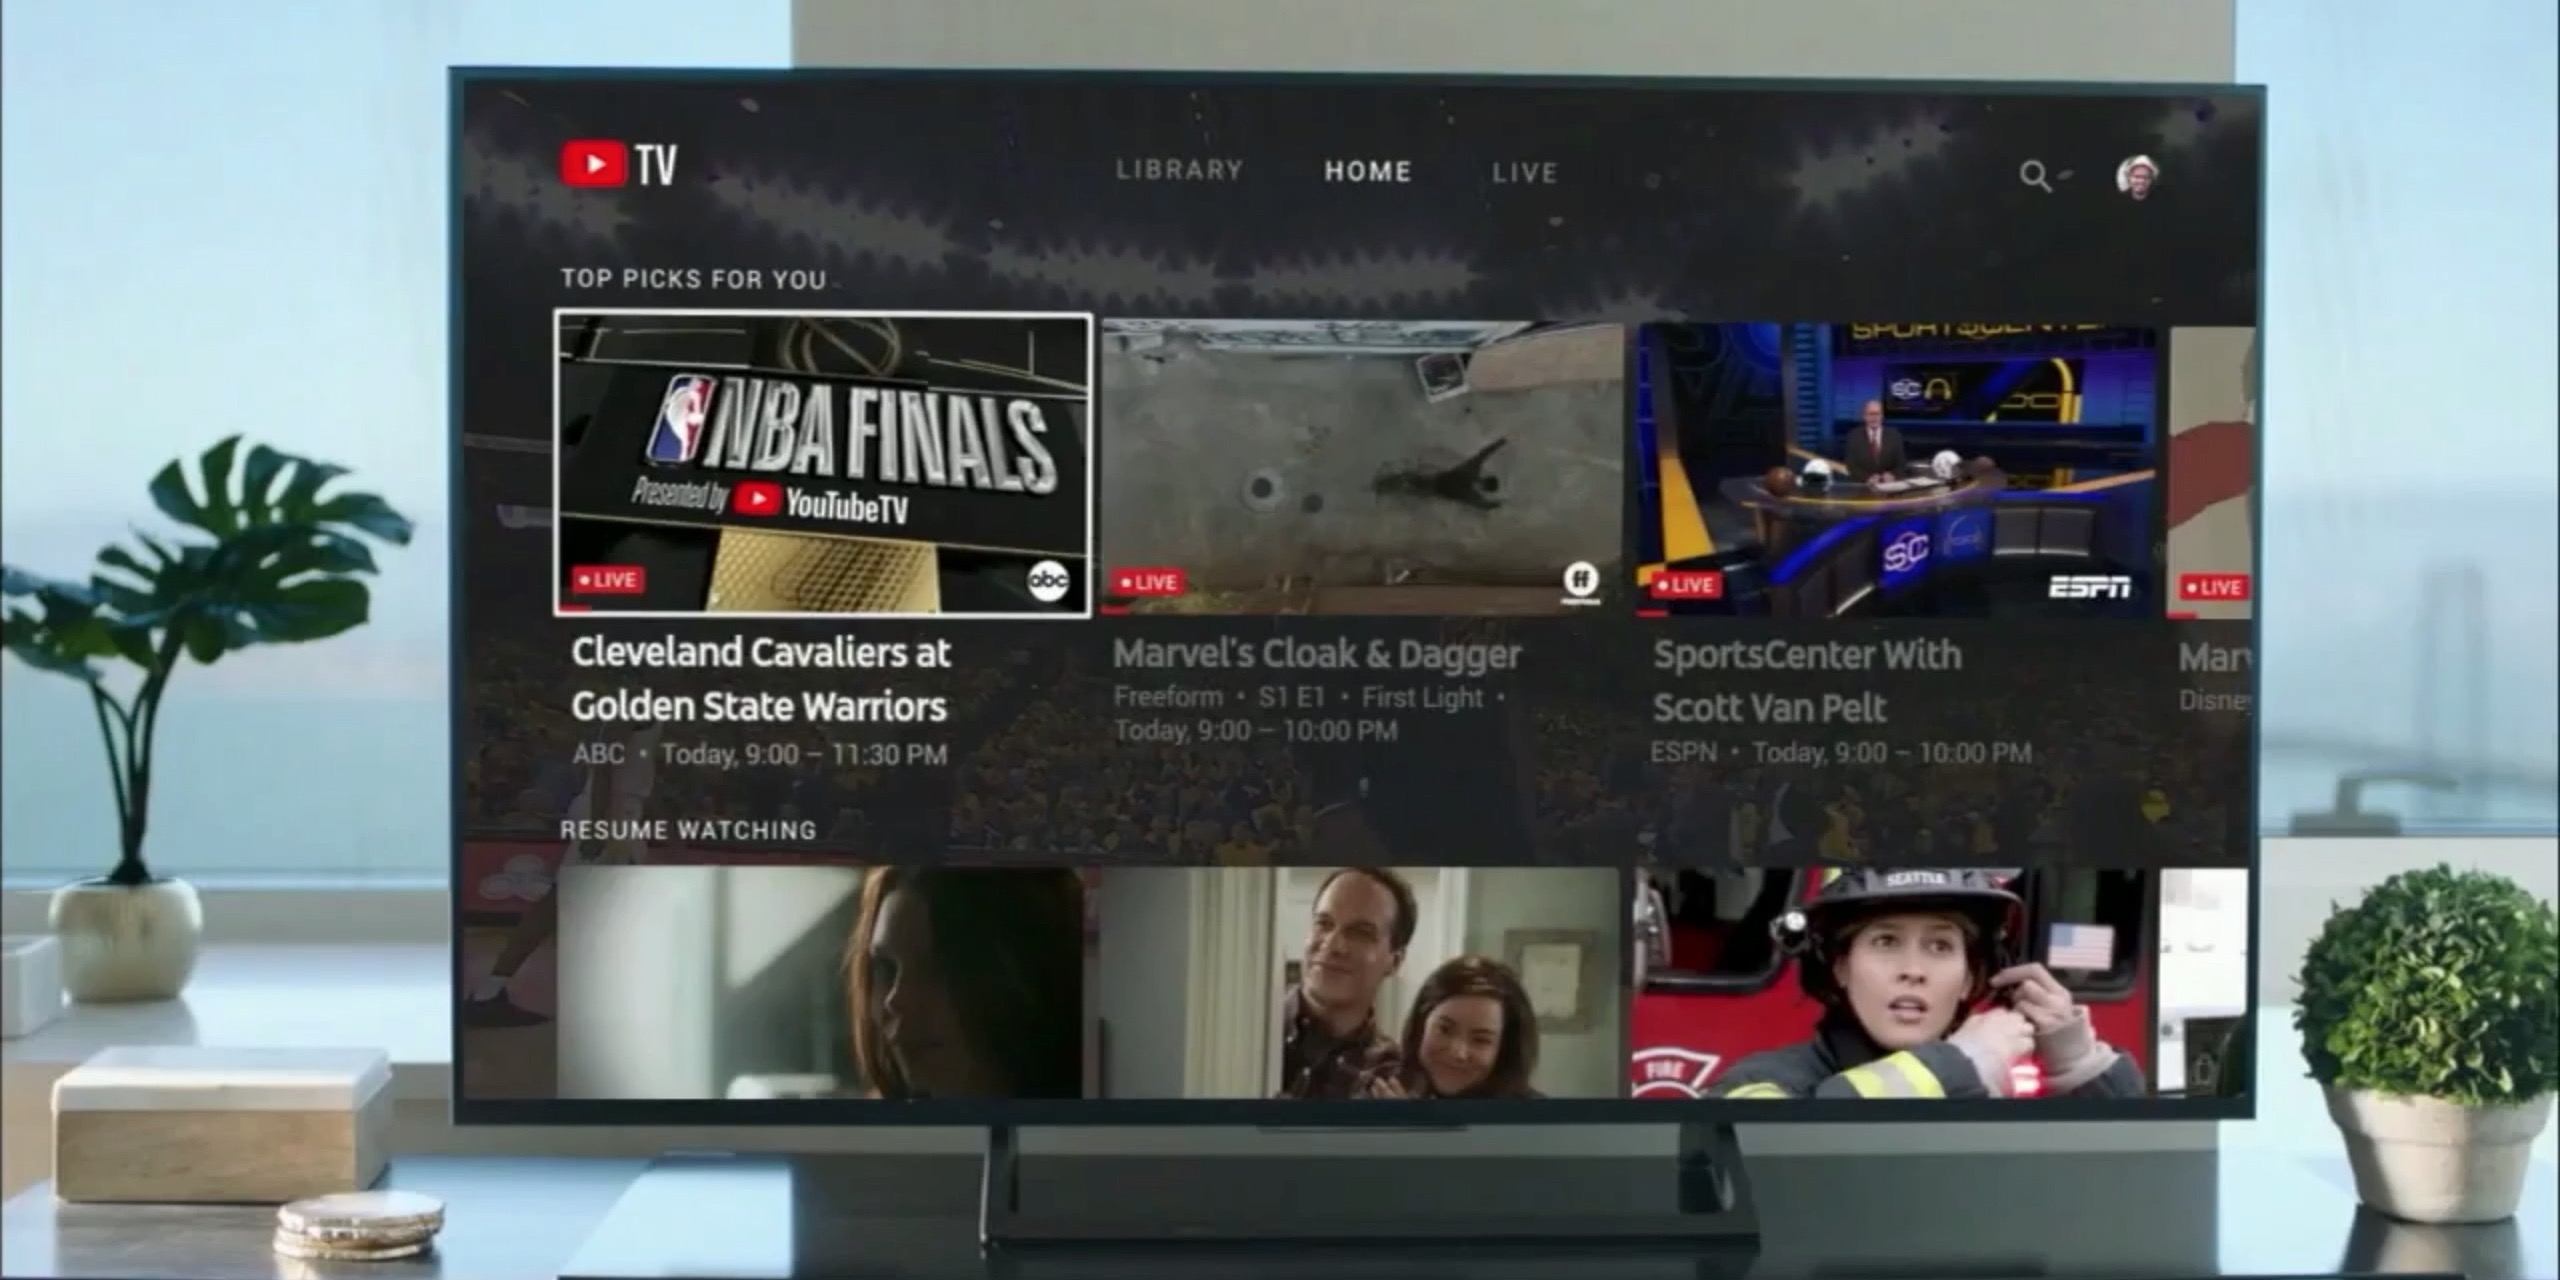 YouTube TV advertising during NBA Finals transitions from ad to live Game 1 Video